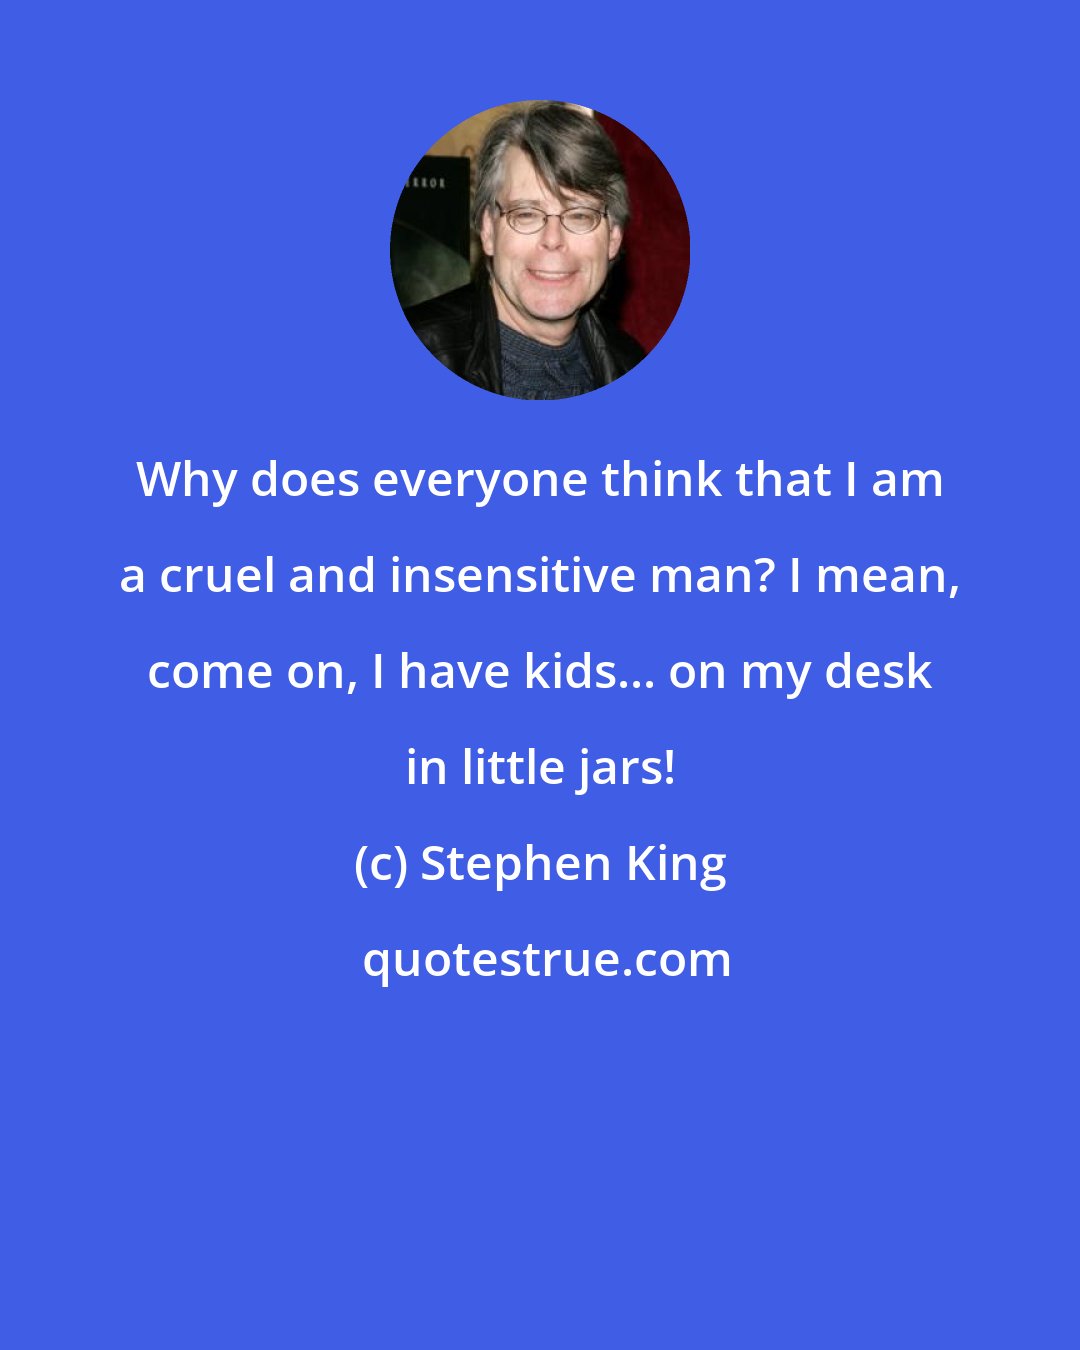 Stephen King: Why does everyone think that I am a cruel and insensitive man? I mean, come on, I have kids... on my desk in little jars!